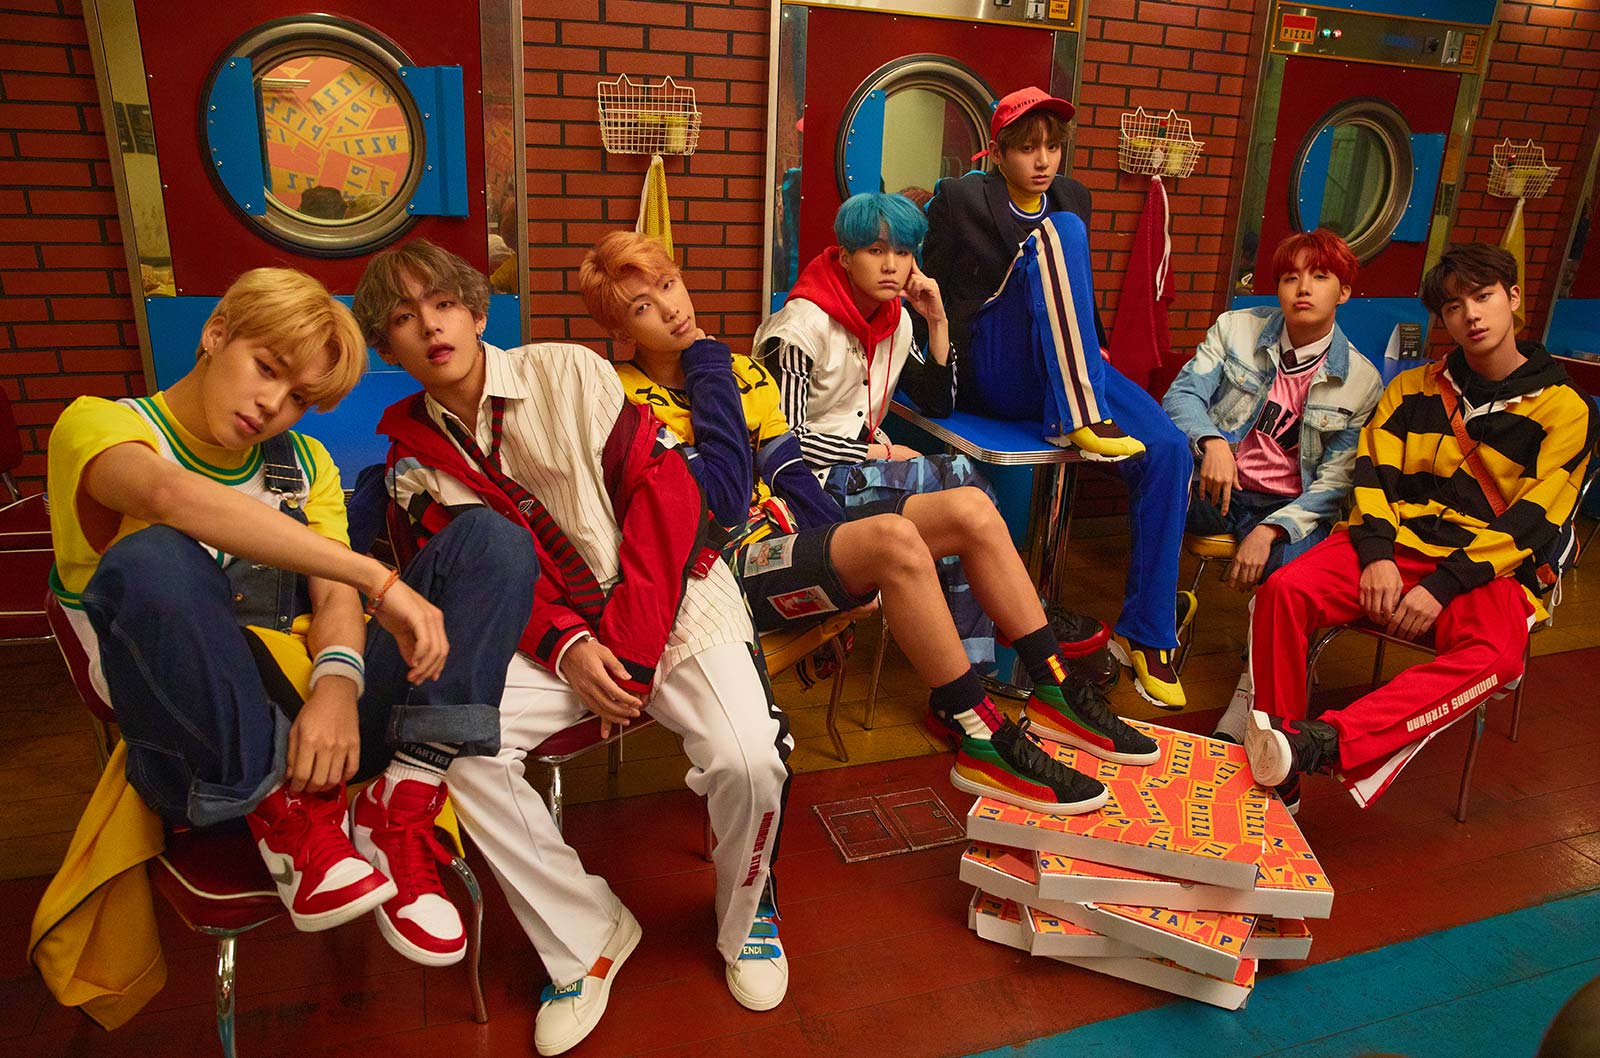 BTS Goes For Bright And Colorful Concepts In New “Love Yourself: Her” Photo